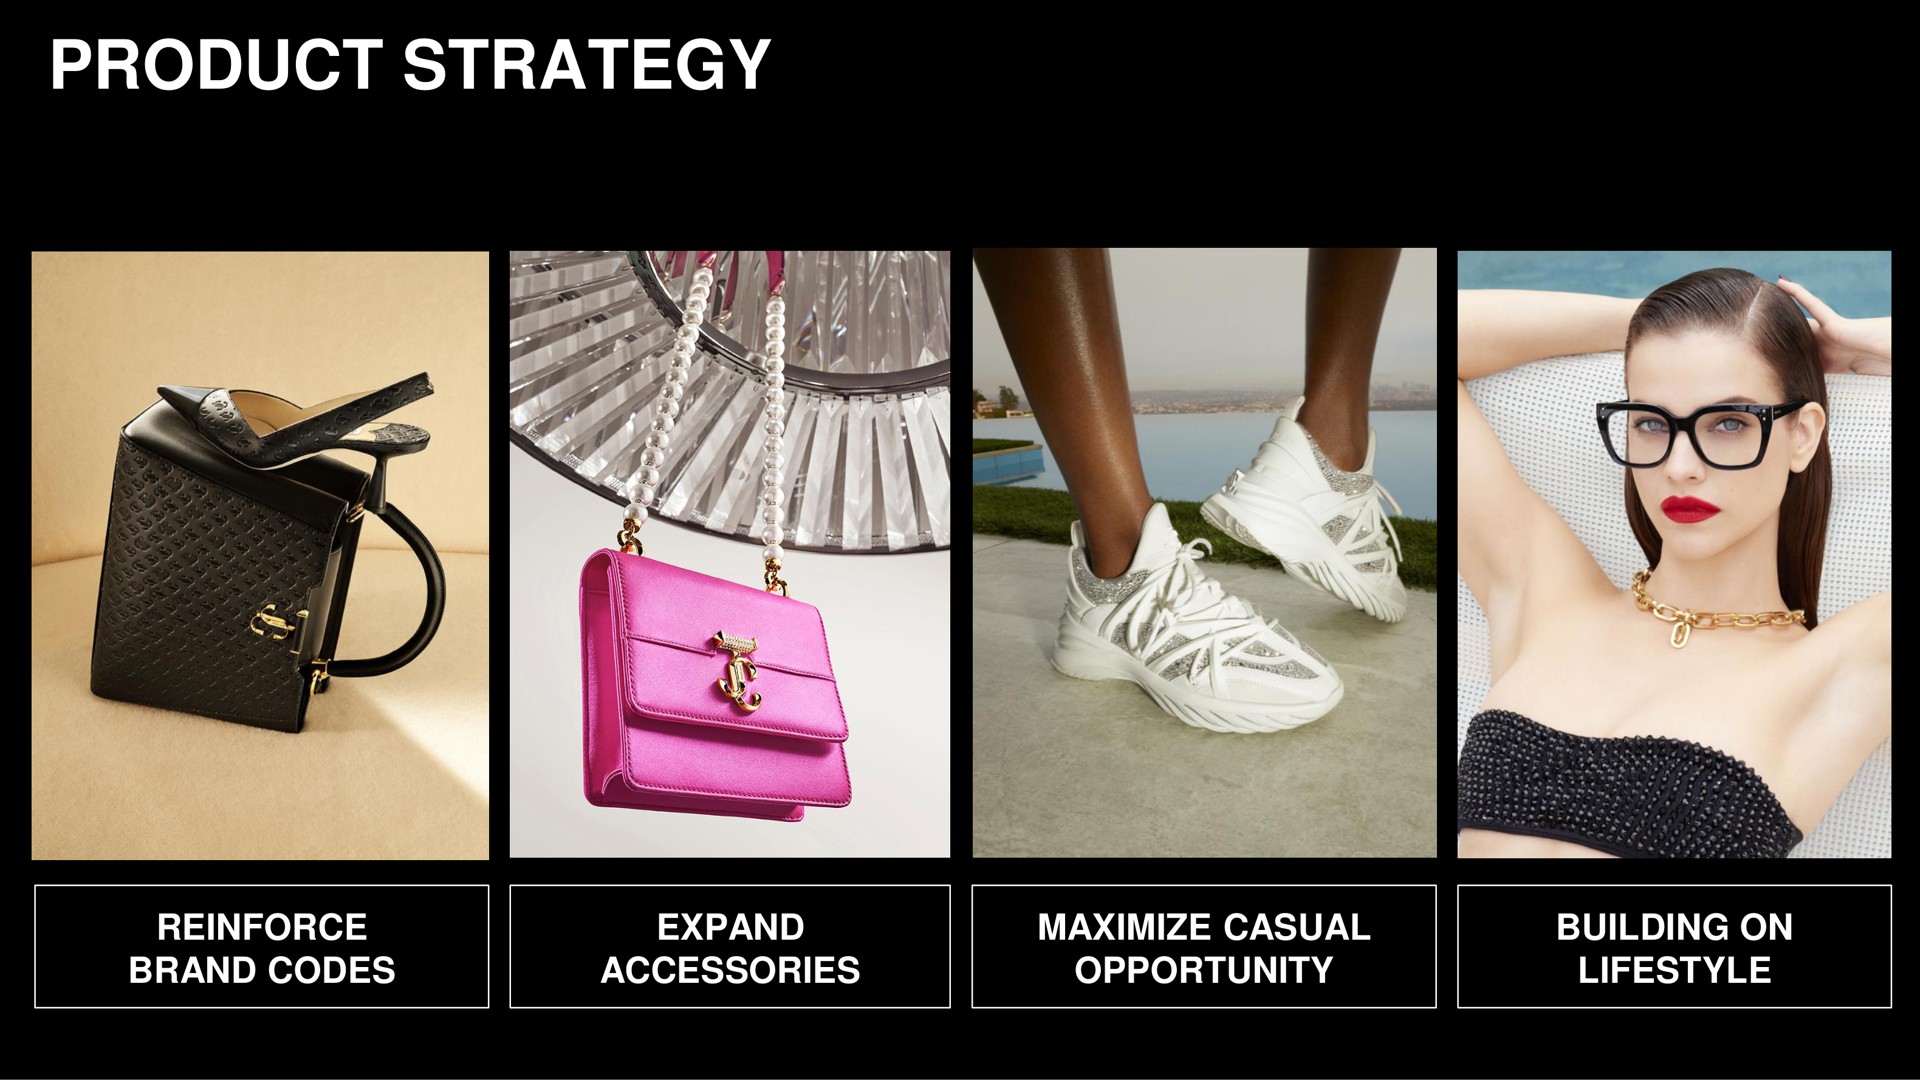 product strategy a reinforce brand codes expand accessories maximize casual opportunity building on | Capri Holdings